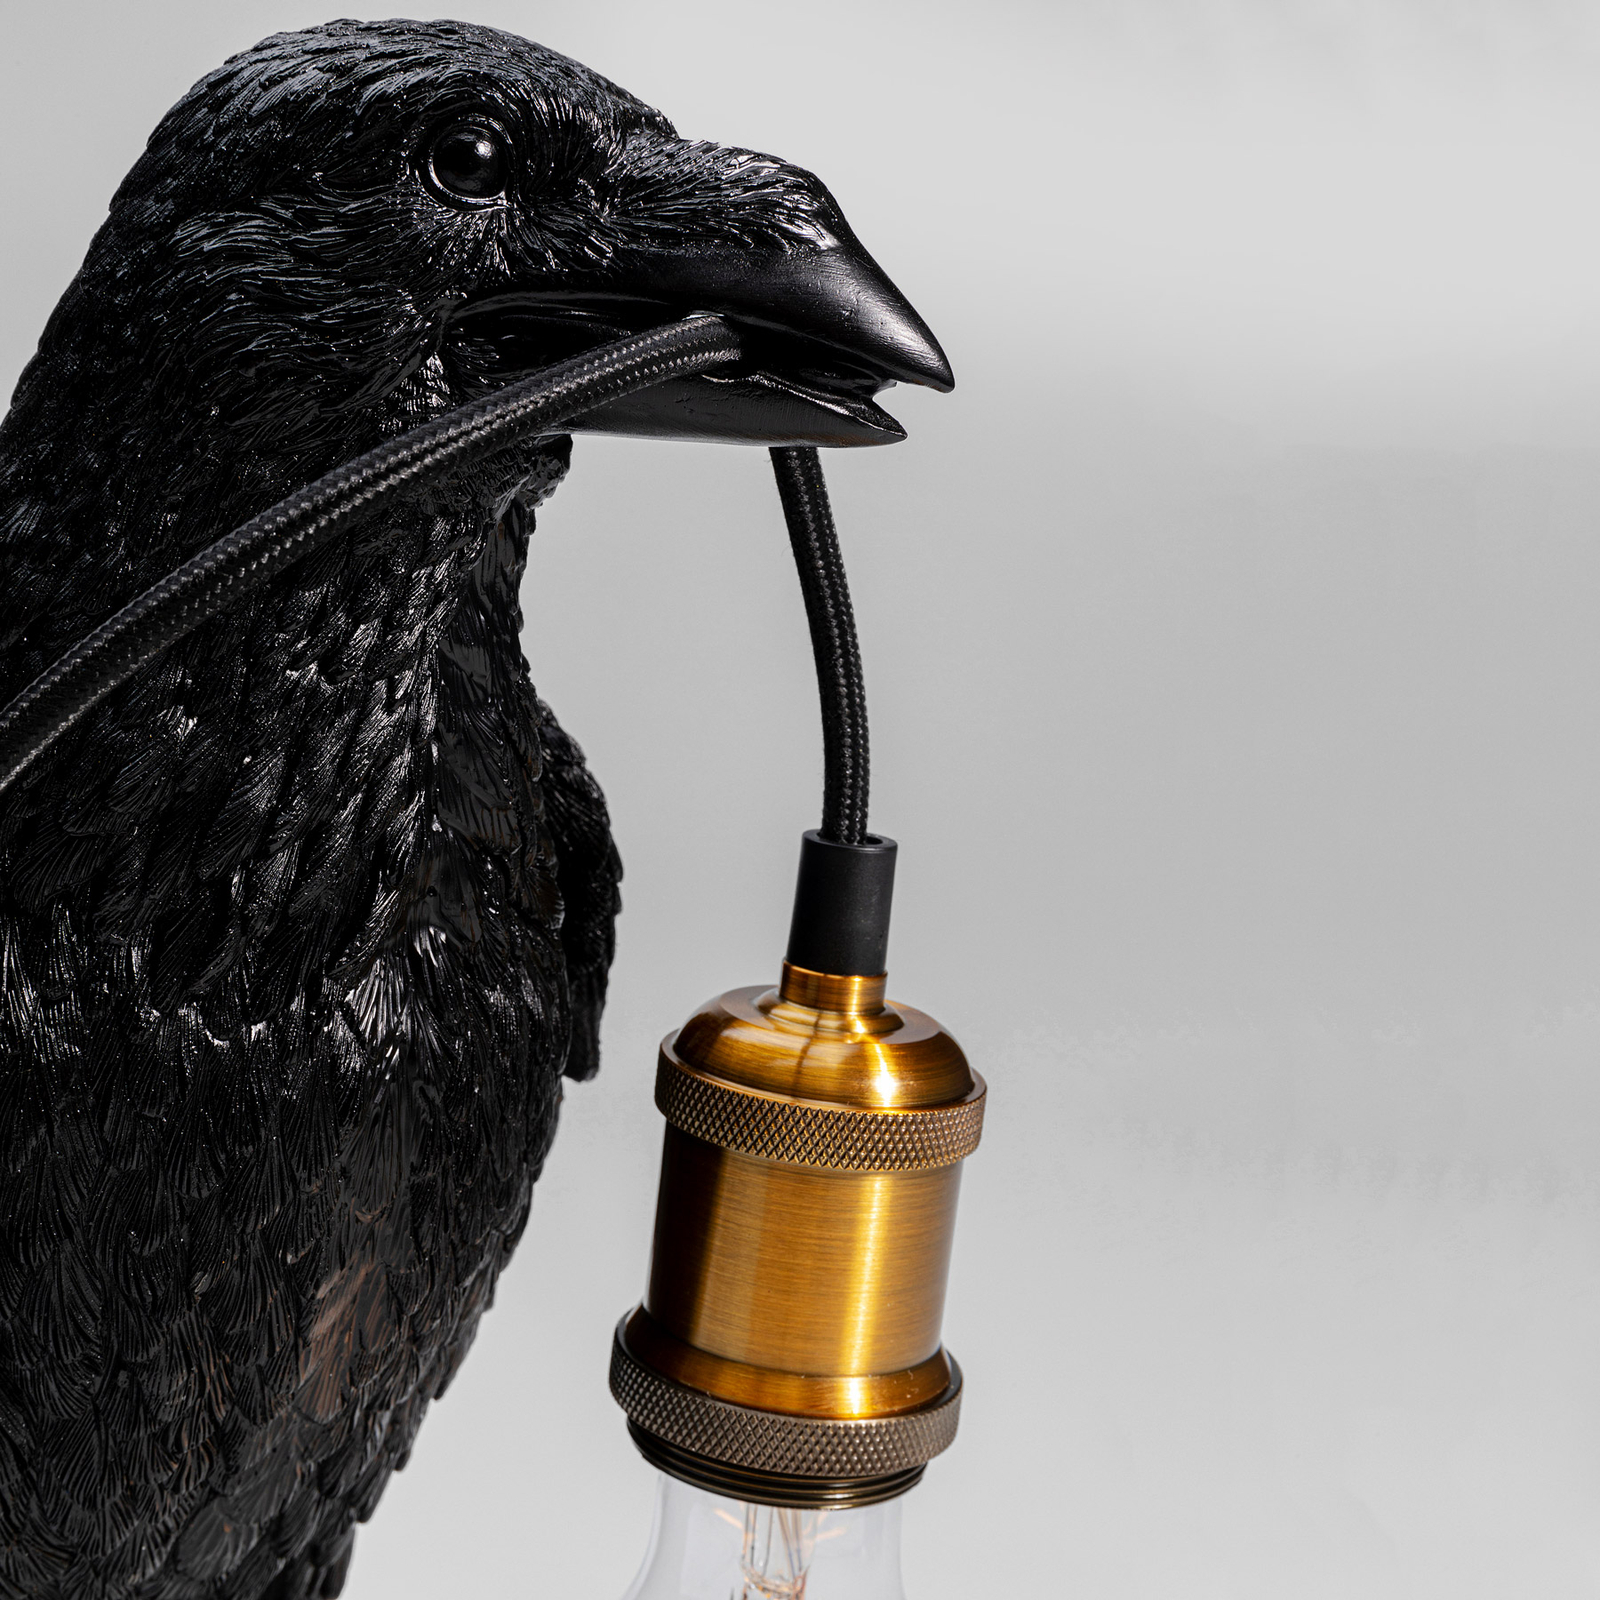 KARE Animal Crow table lamp in the form of a crow